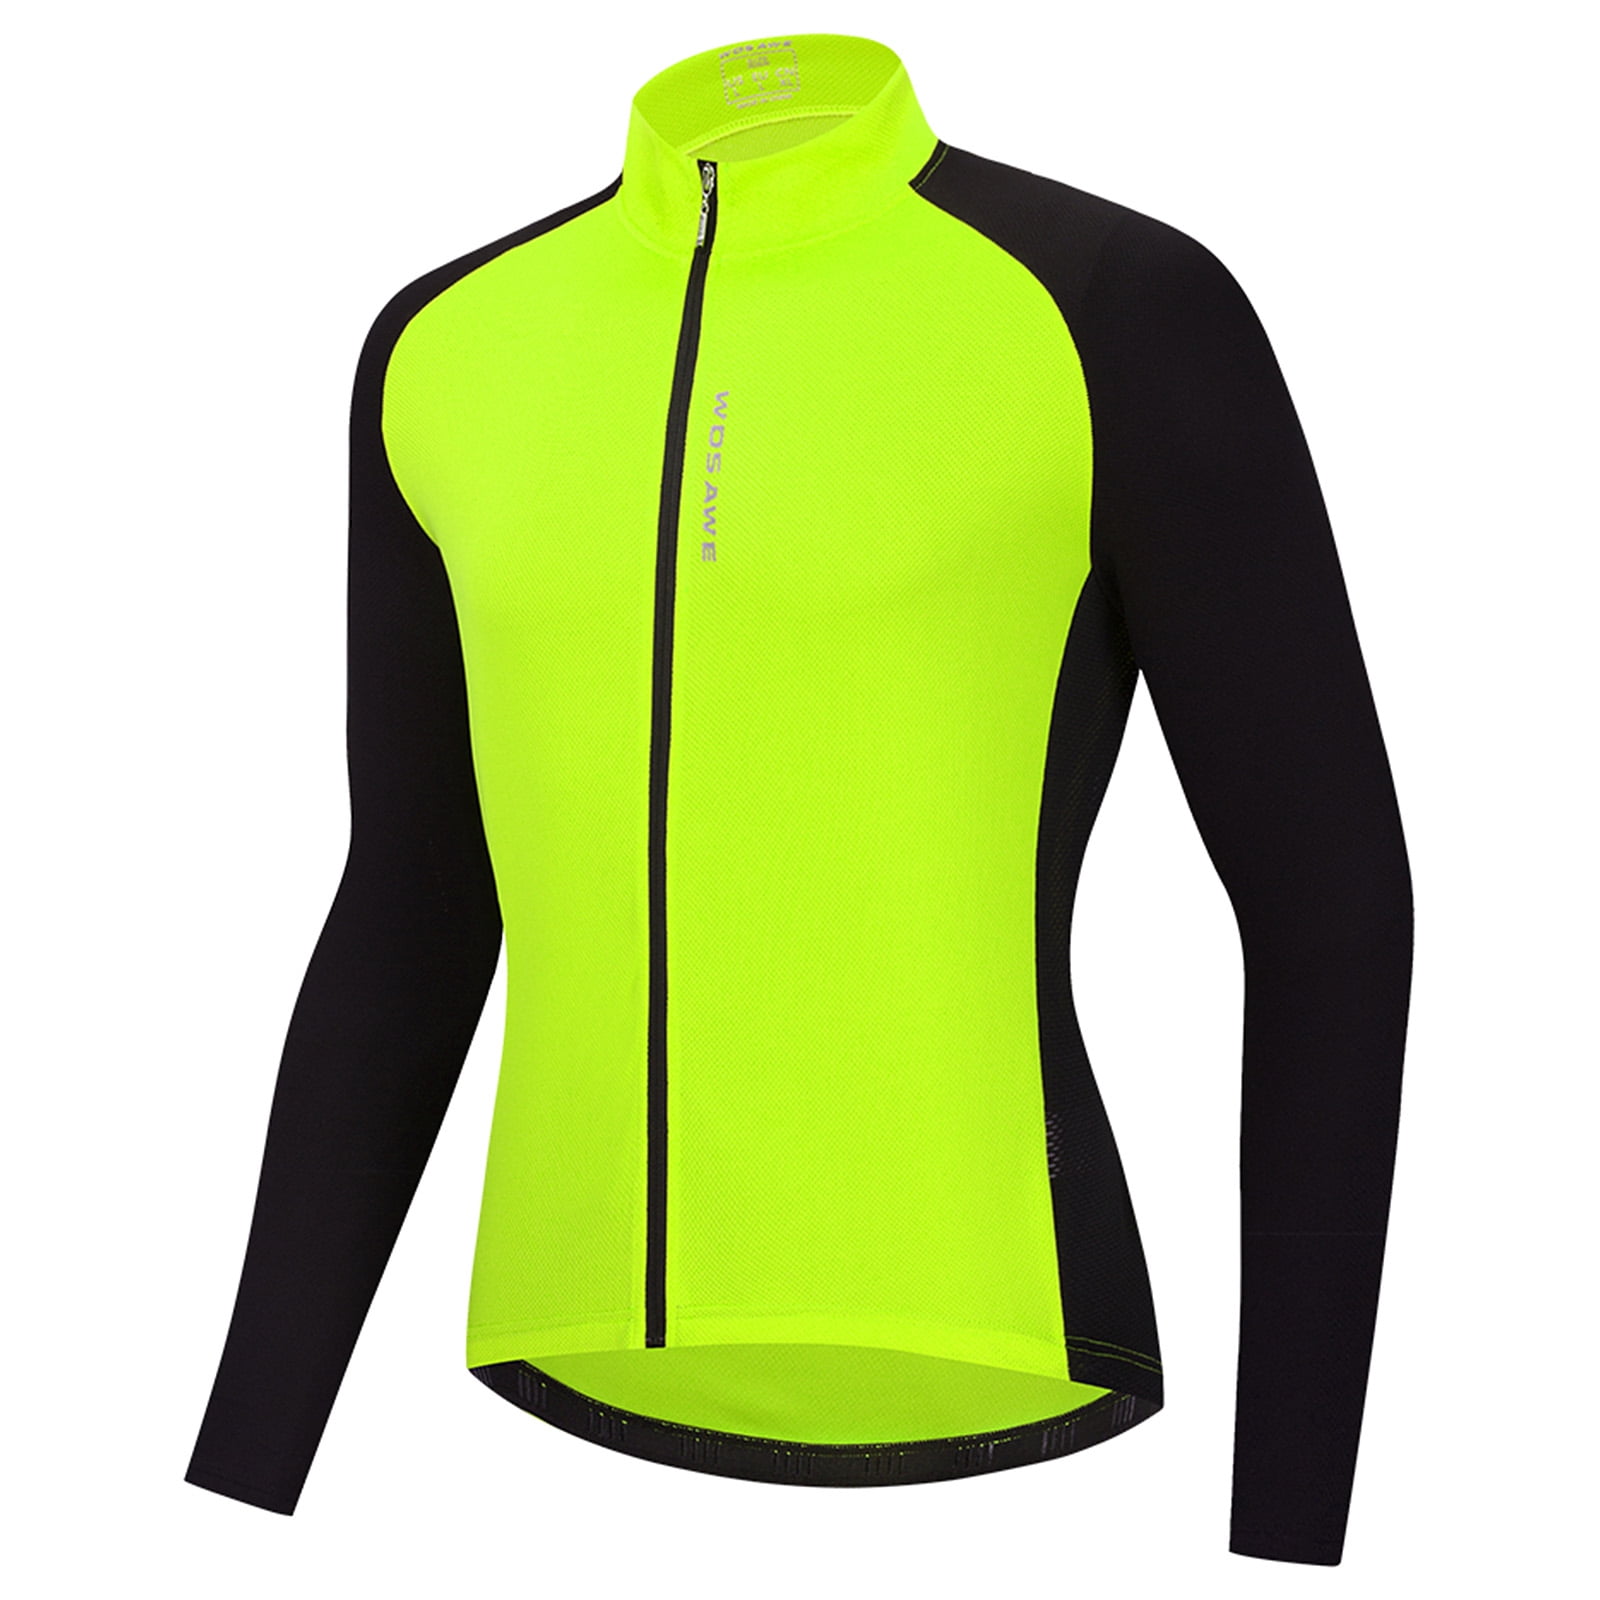 Details about   Cycling Jersey Long Sleeve Full Zip Women's Bicycle Shirt Jacket Reflective L